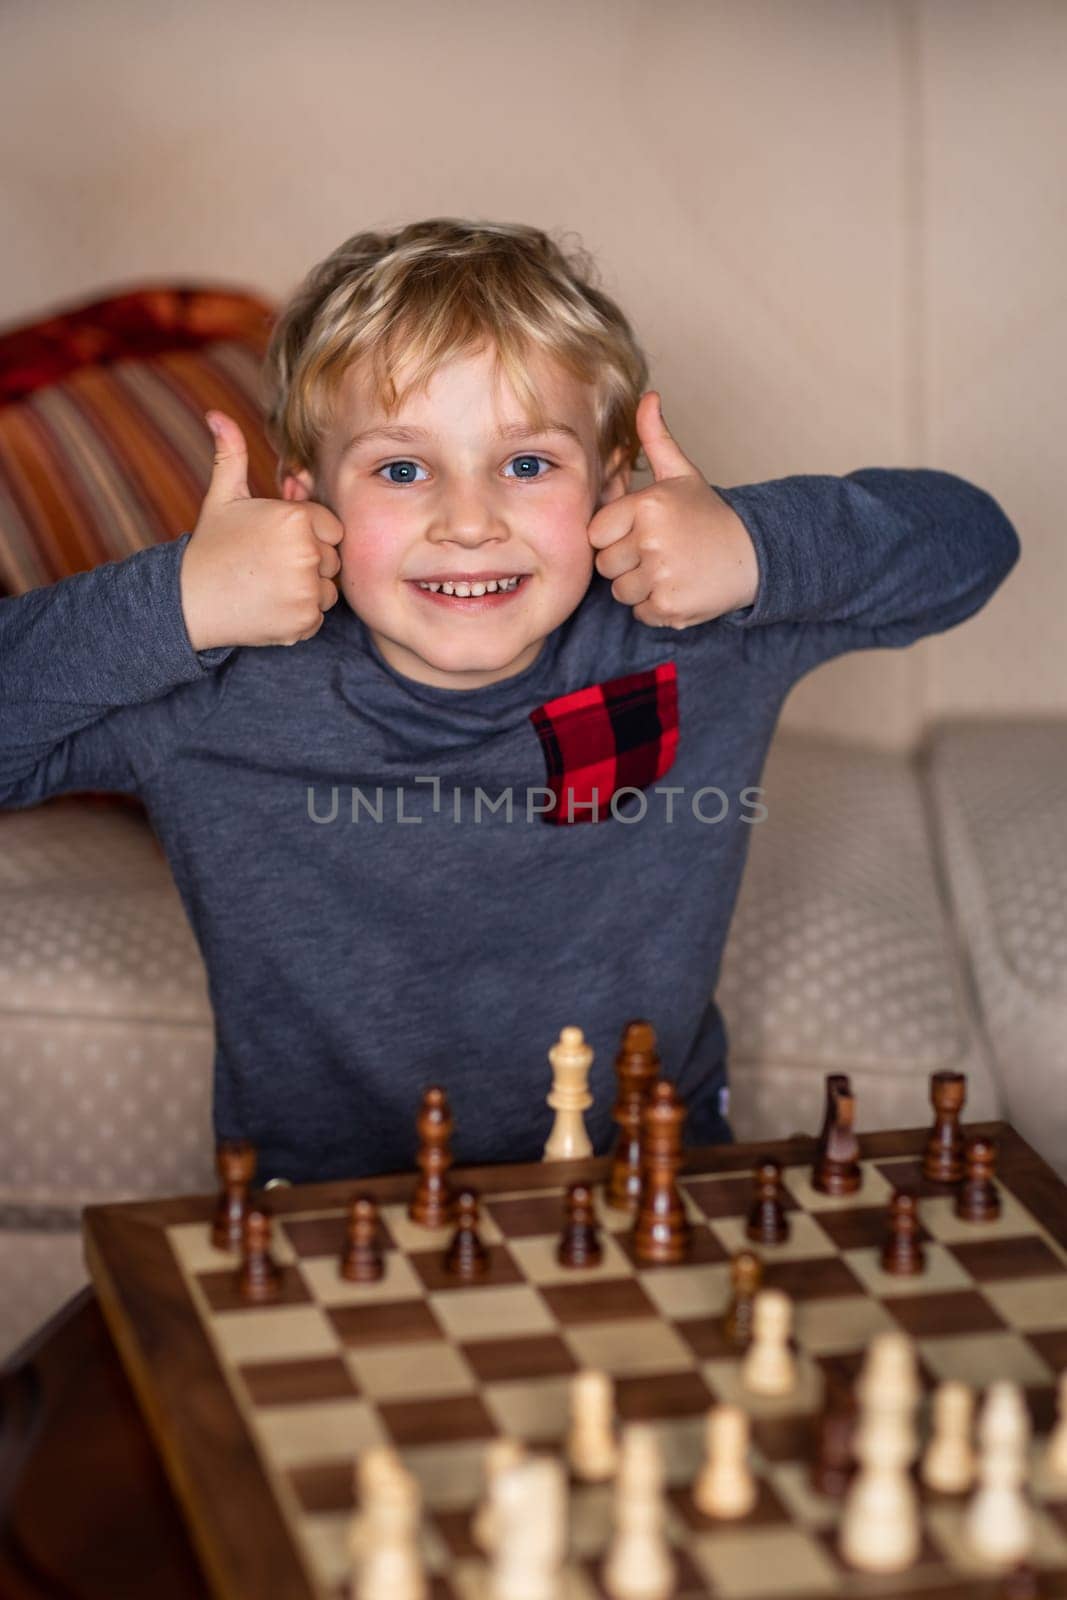 Small child 5 years old playing a game of chess on large chess board. Chess board on table in front of the boy he is happy to win, showing thumbs up